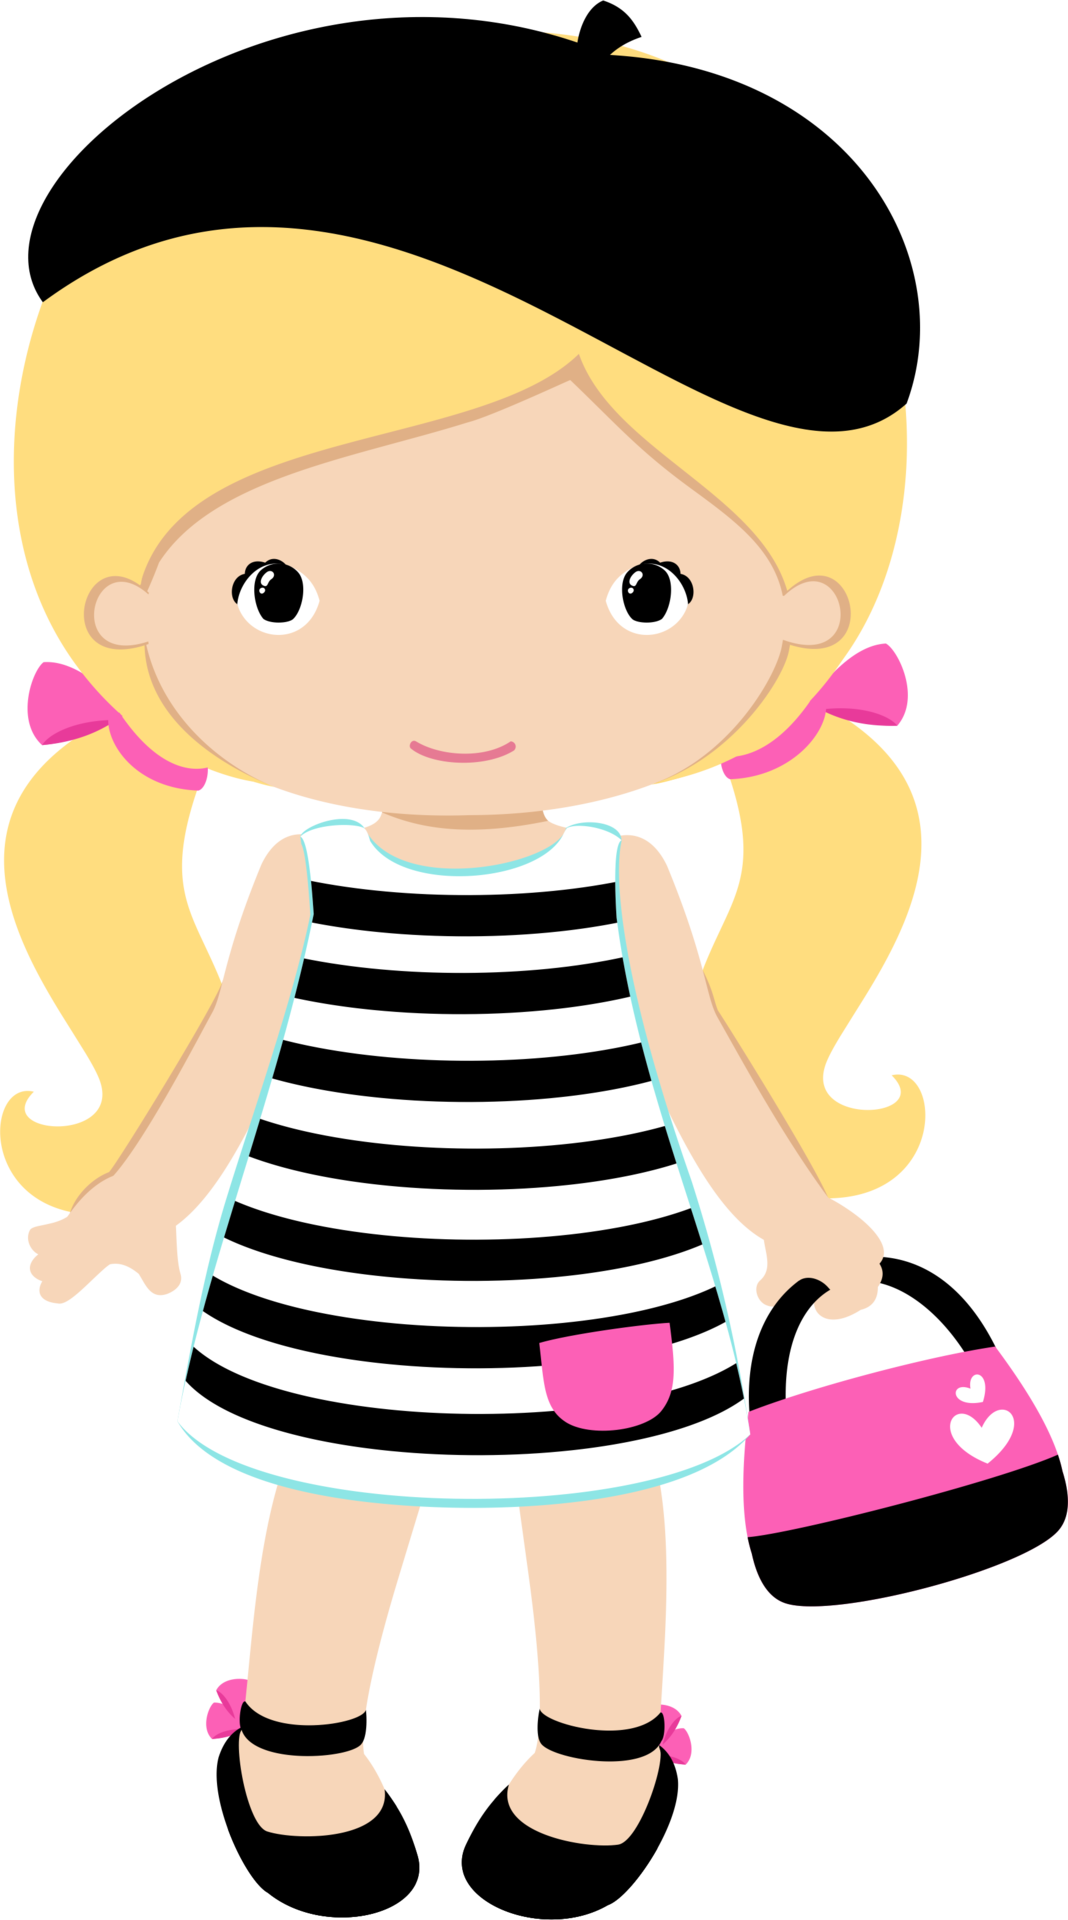  shared ver todas. Clipart people female